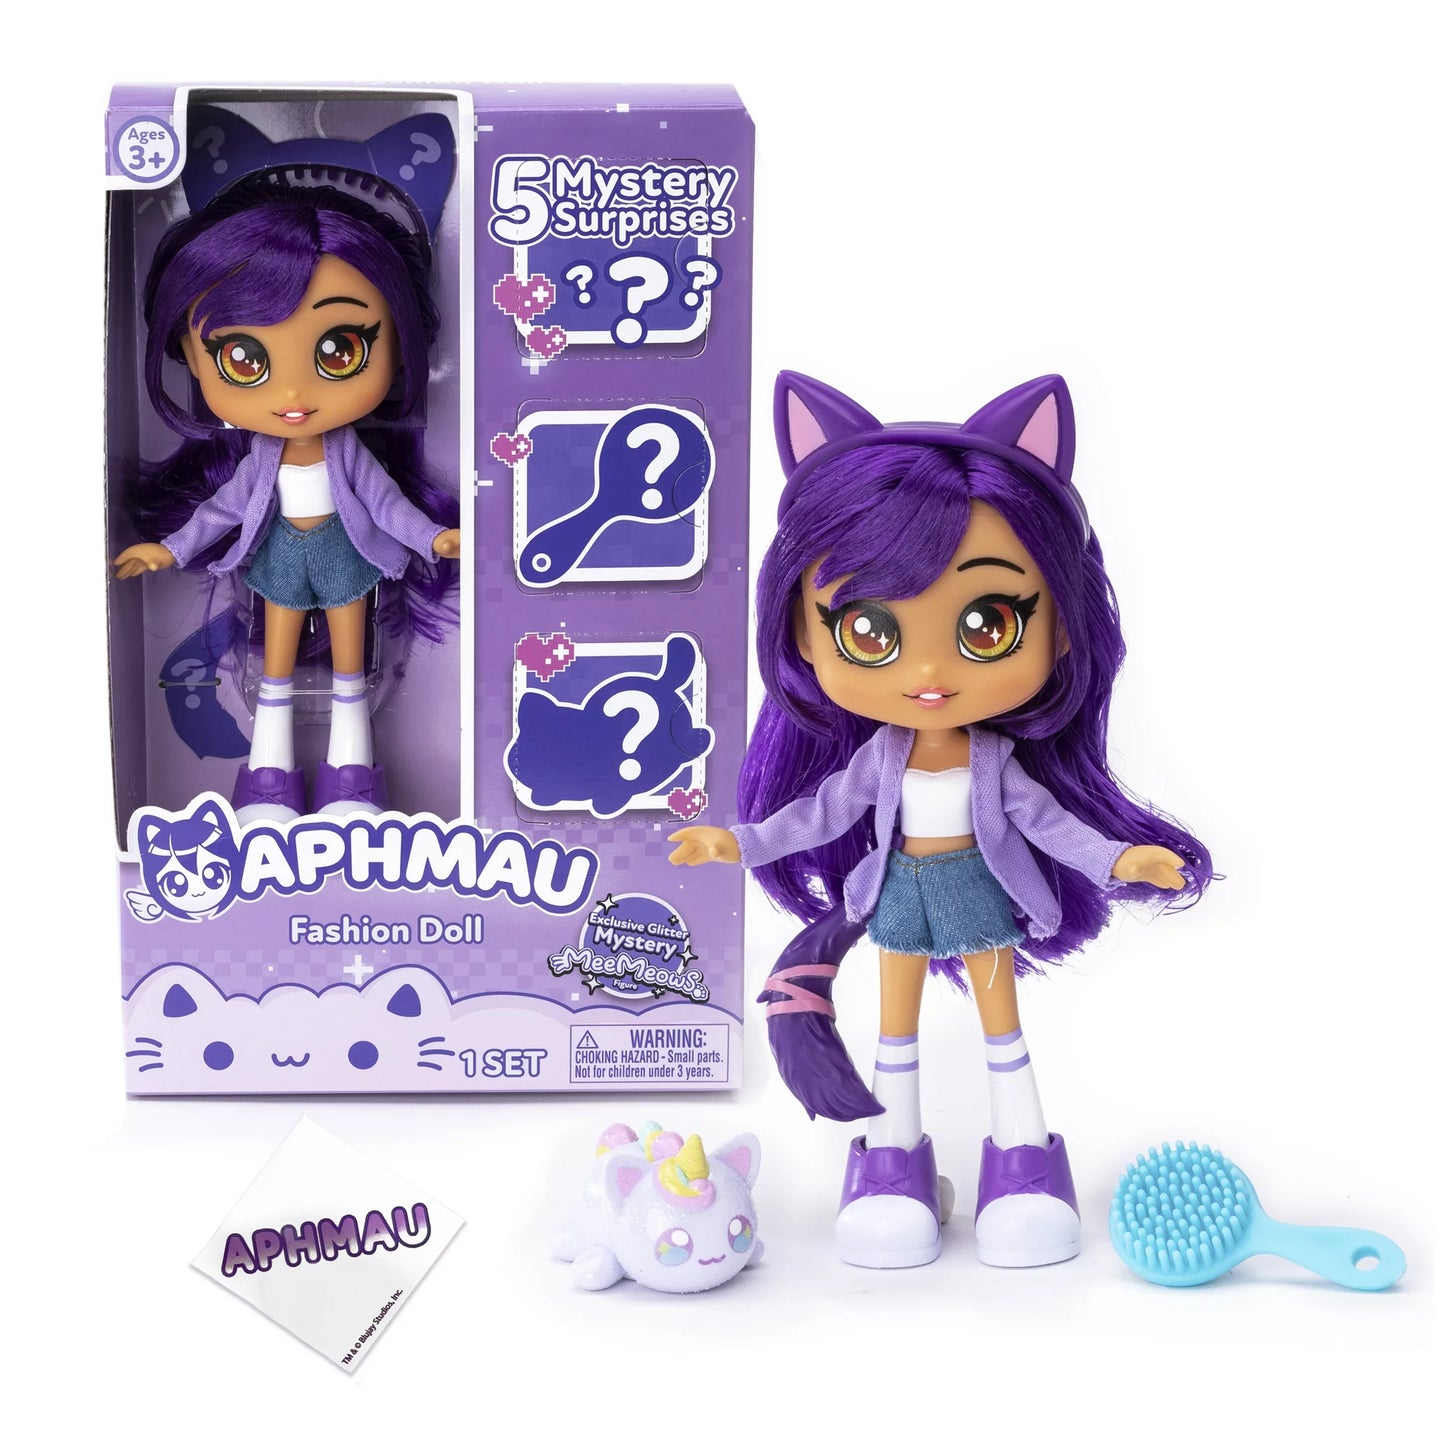 Aphmau 7" Doll Mystery Surprise MeeMeows Toy, Based on the #1 female-led YouTube gaming channel, Aphmau